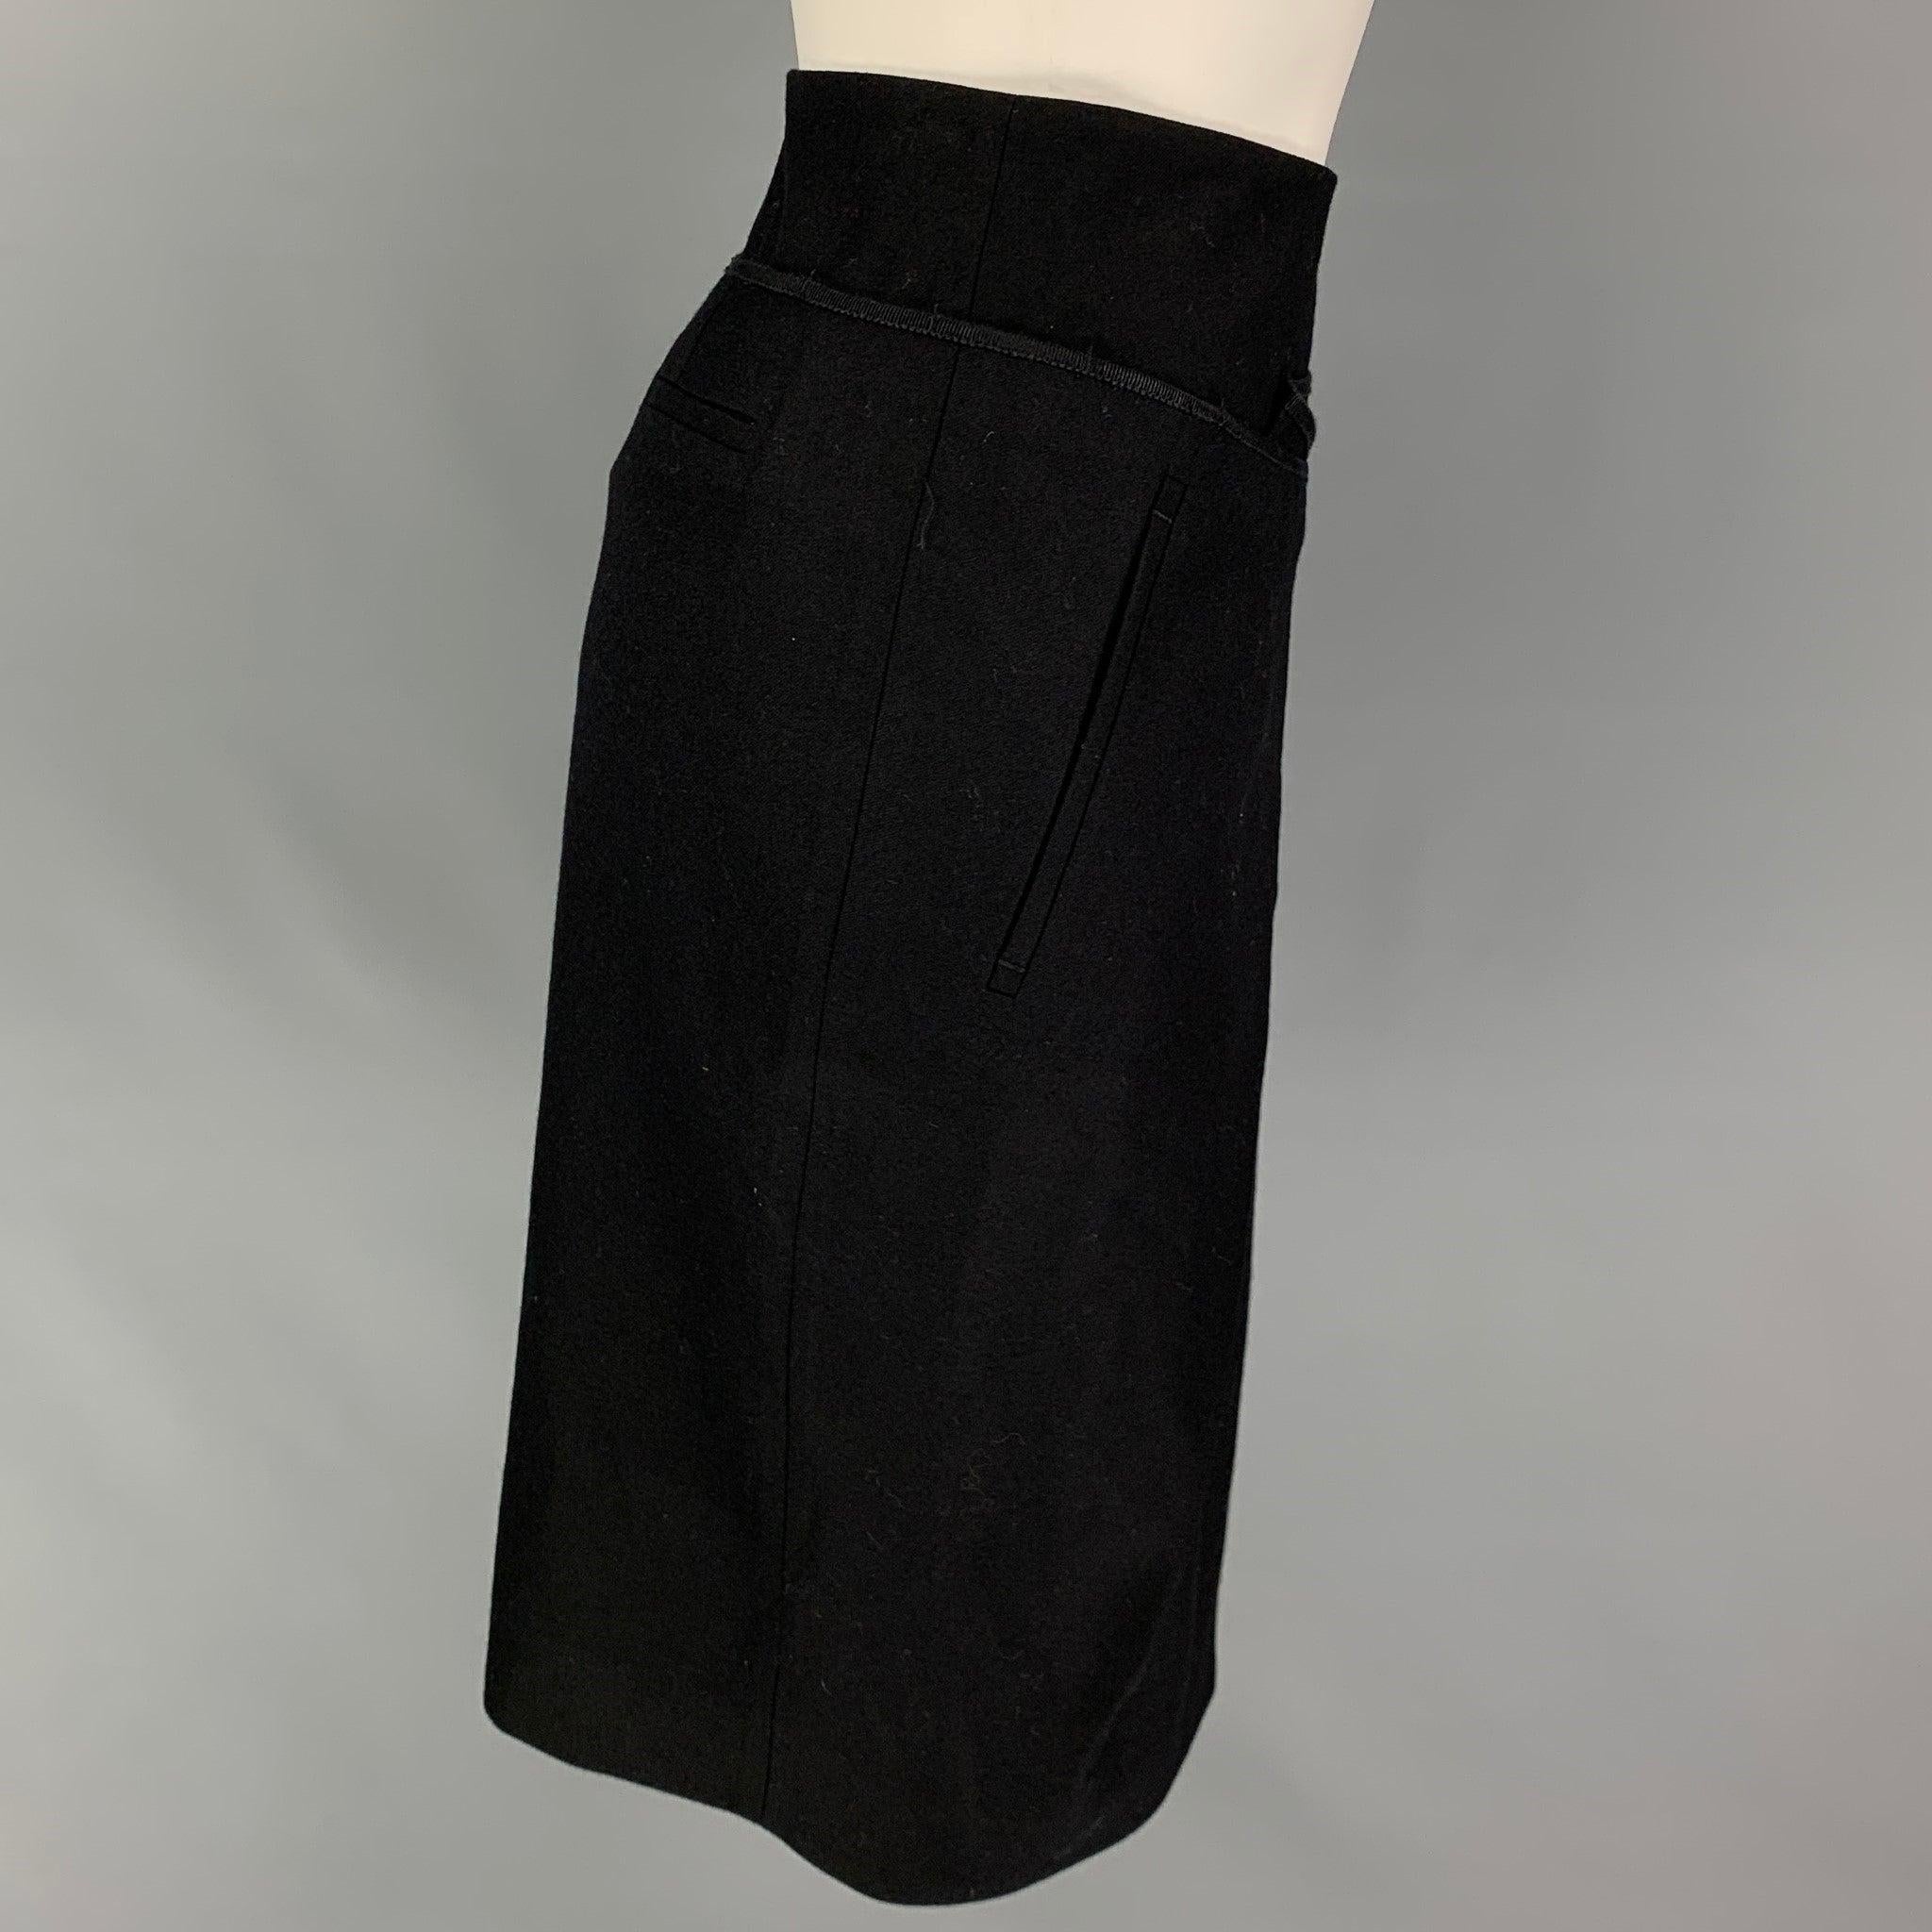 SALVATORE FERRAGAMO skirt comes in a black wool featuring a pleated style, ribbon trim, and a side zipper closure. Made in Italy.
Very Good
Pre-Owned Condition. 

Marked:   38 

Measurements: 
  Waist: 30 inches  Hip: 34 inches  Length: 23 inches 
 